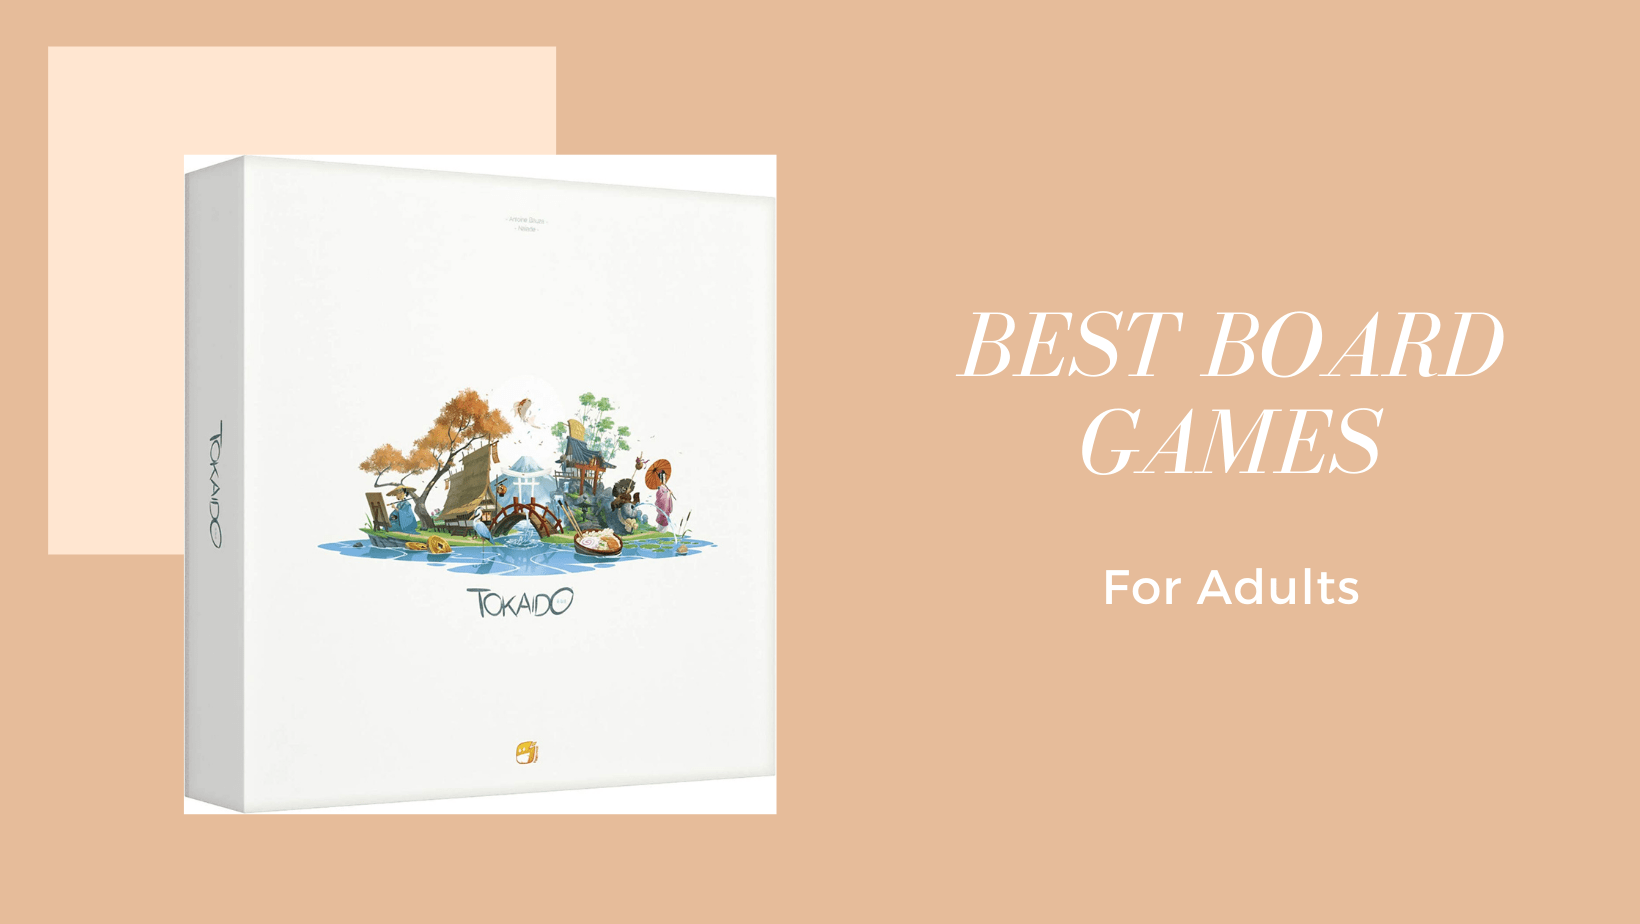 The board game Tokaido as one of the best board games for adults.